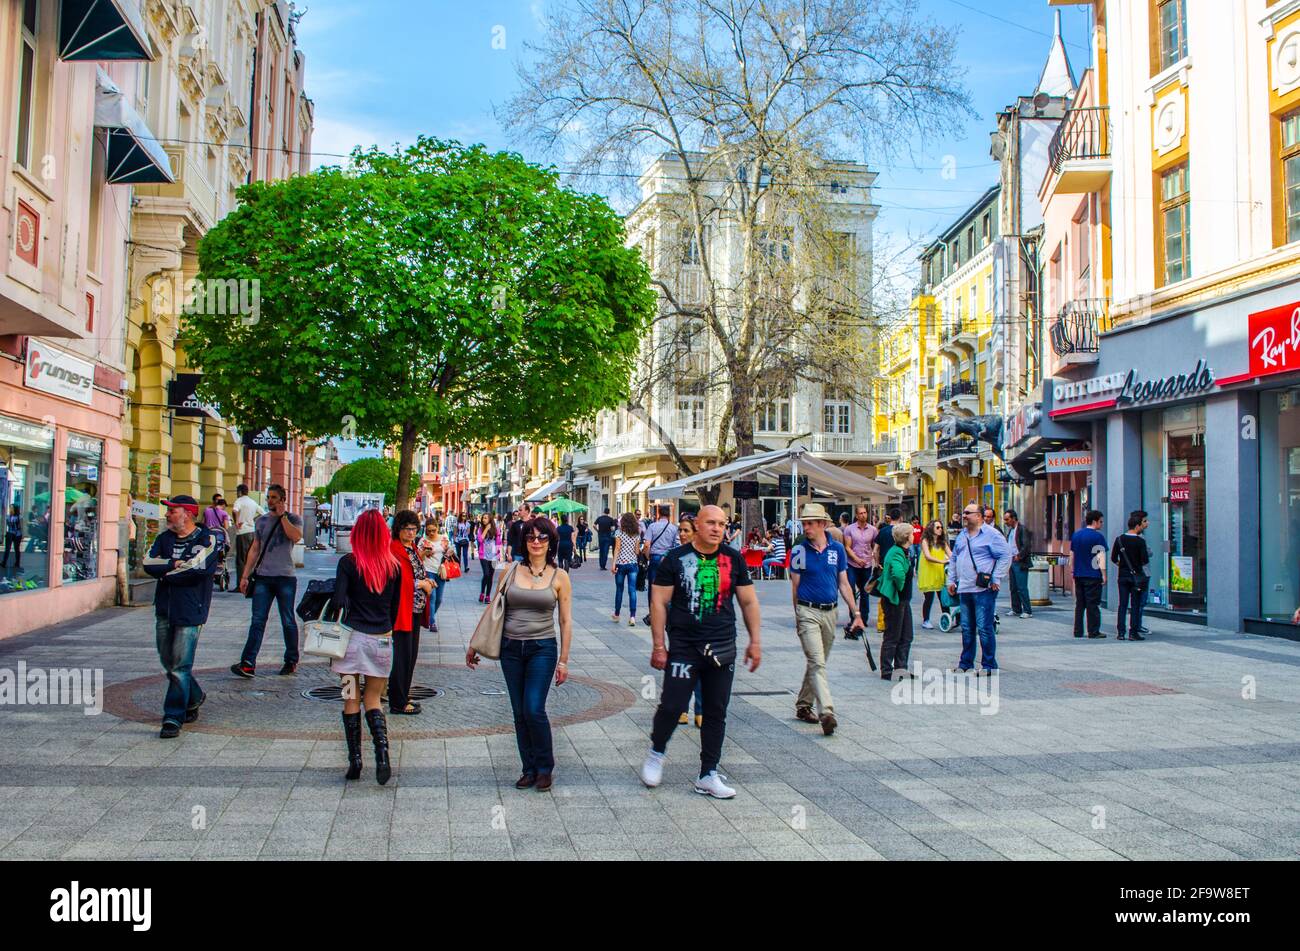 PLOVDIV, BULGARIA, APRIL 7, 2015: People are strolling through the main boulevard in center of Plovdiv which is the host of the European Capital of Cu Stock Photo